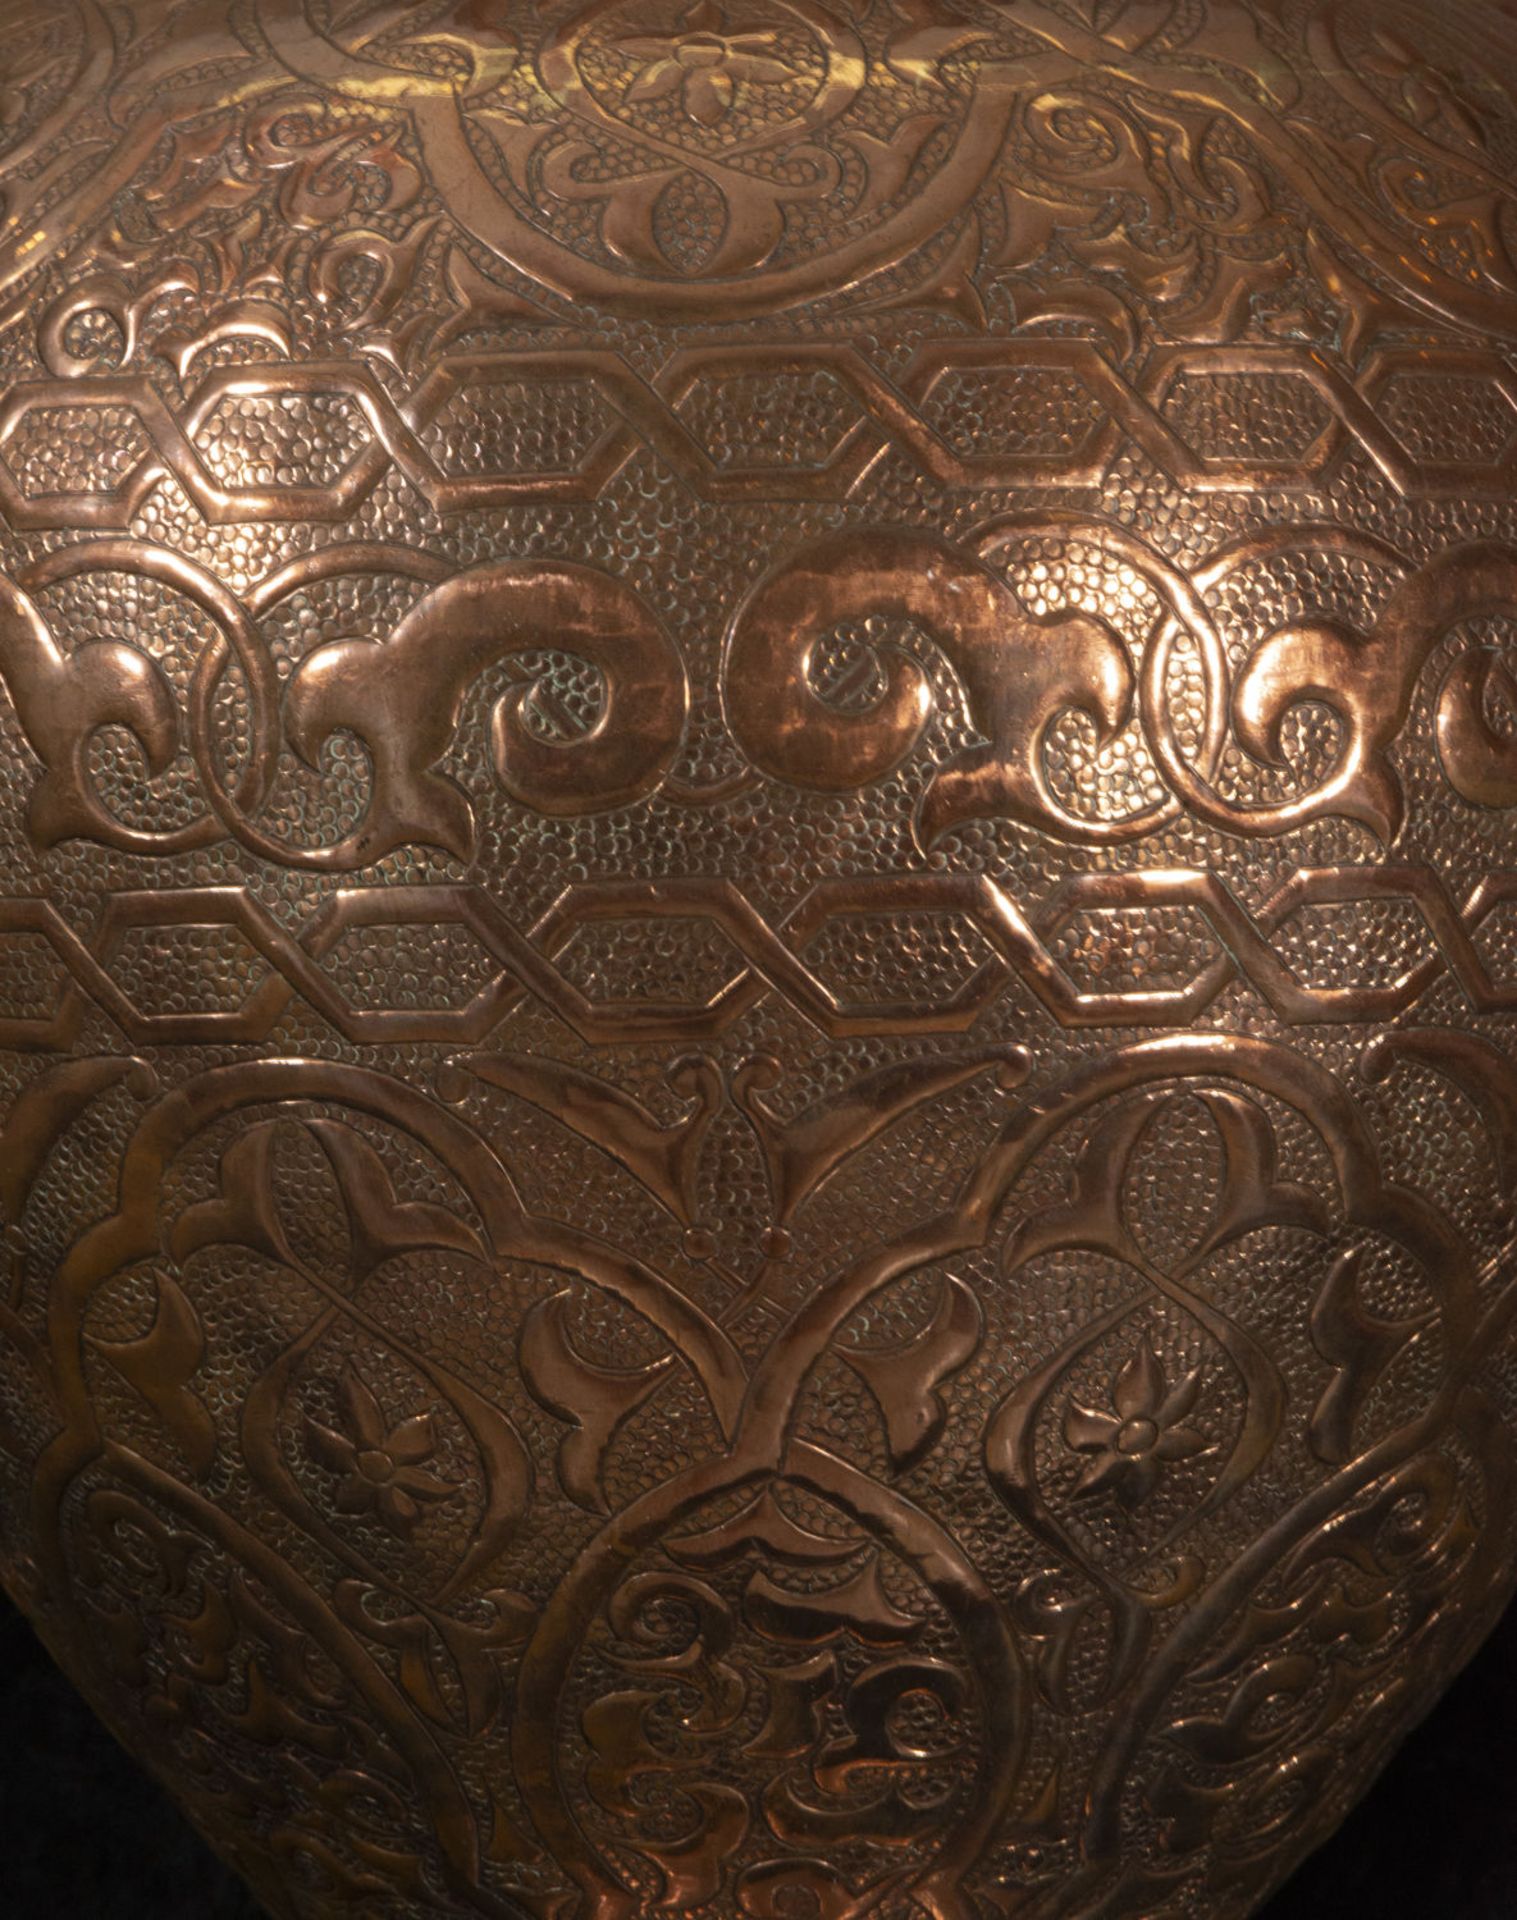 Pair of Large Embossed Copper Vases in the "Alhambra" style, Andalusian Granada work from the 19th c - Bild 6 aus 10